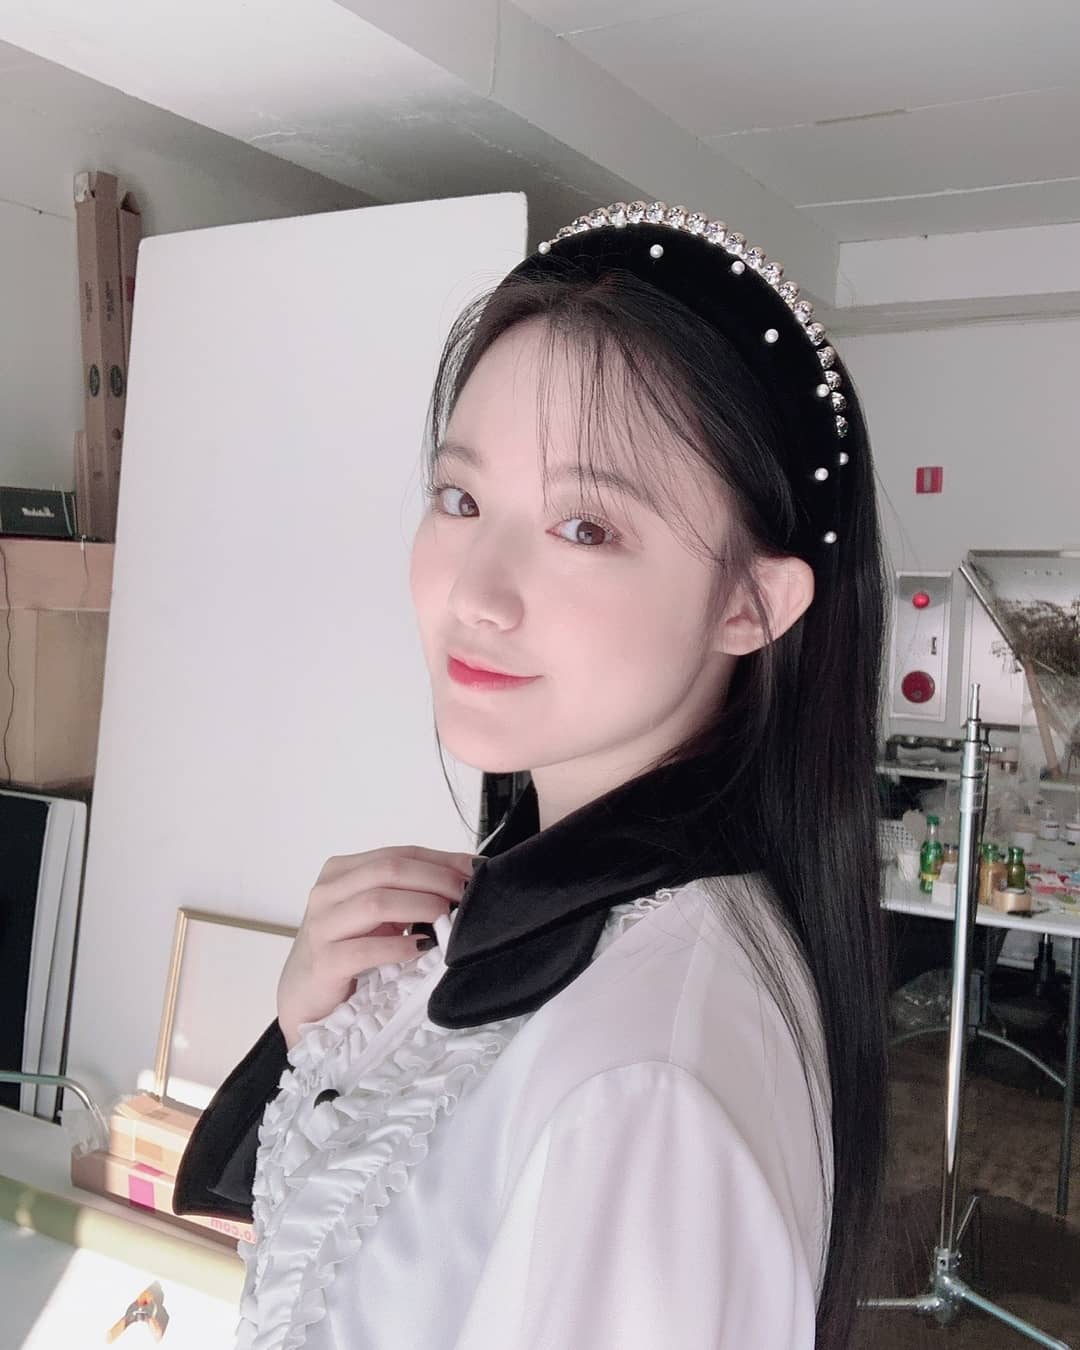 Shuhua (G)I-DLE - Biography, Profile, Facts and Career